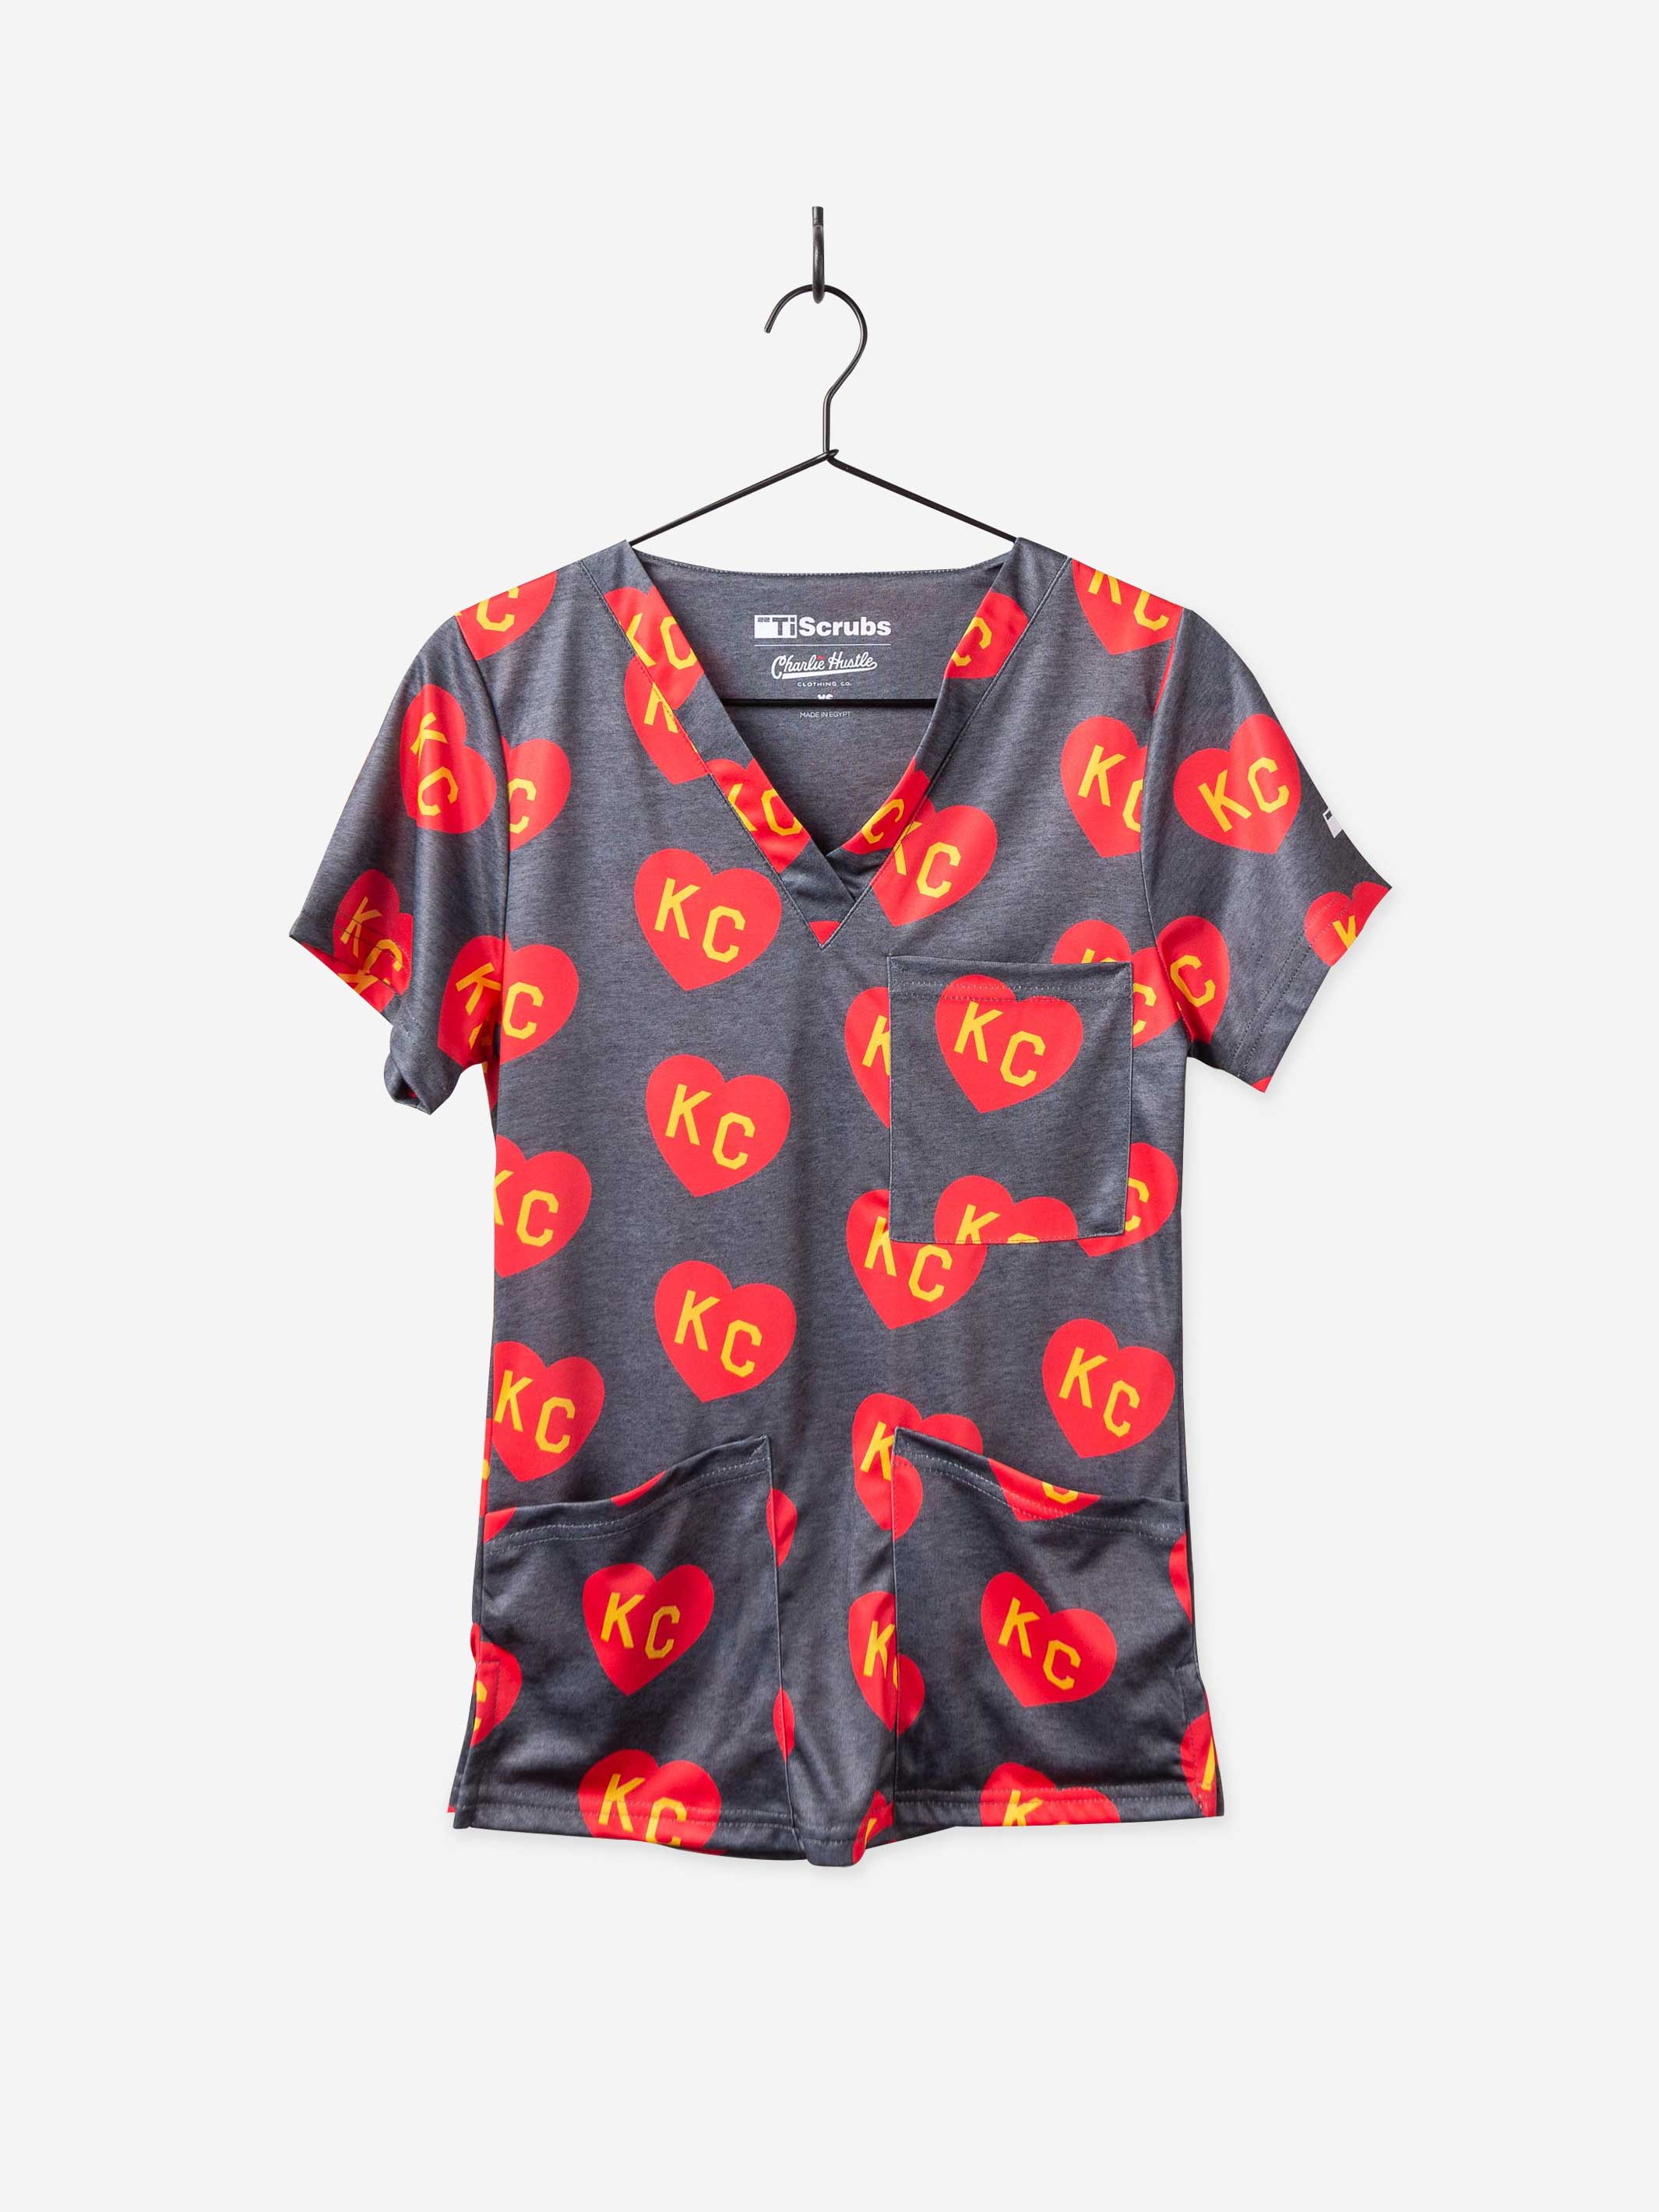 Women's Charlie Hustle Print Scrub Top in Red and Gold with 3 Pockets